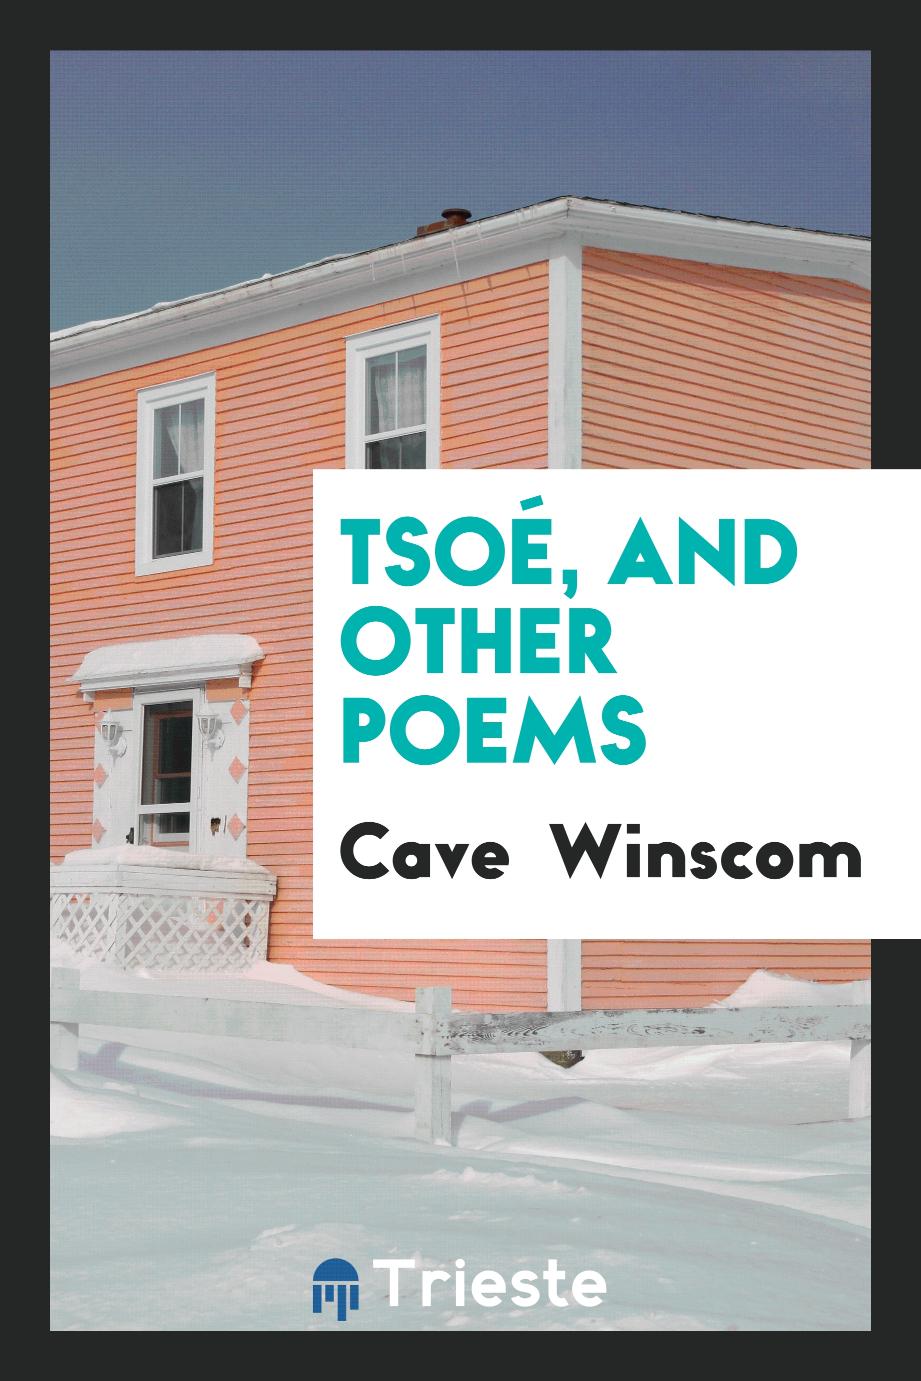 Tsoé, and Other Poems